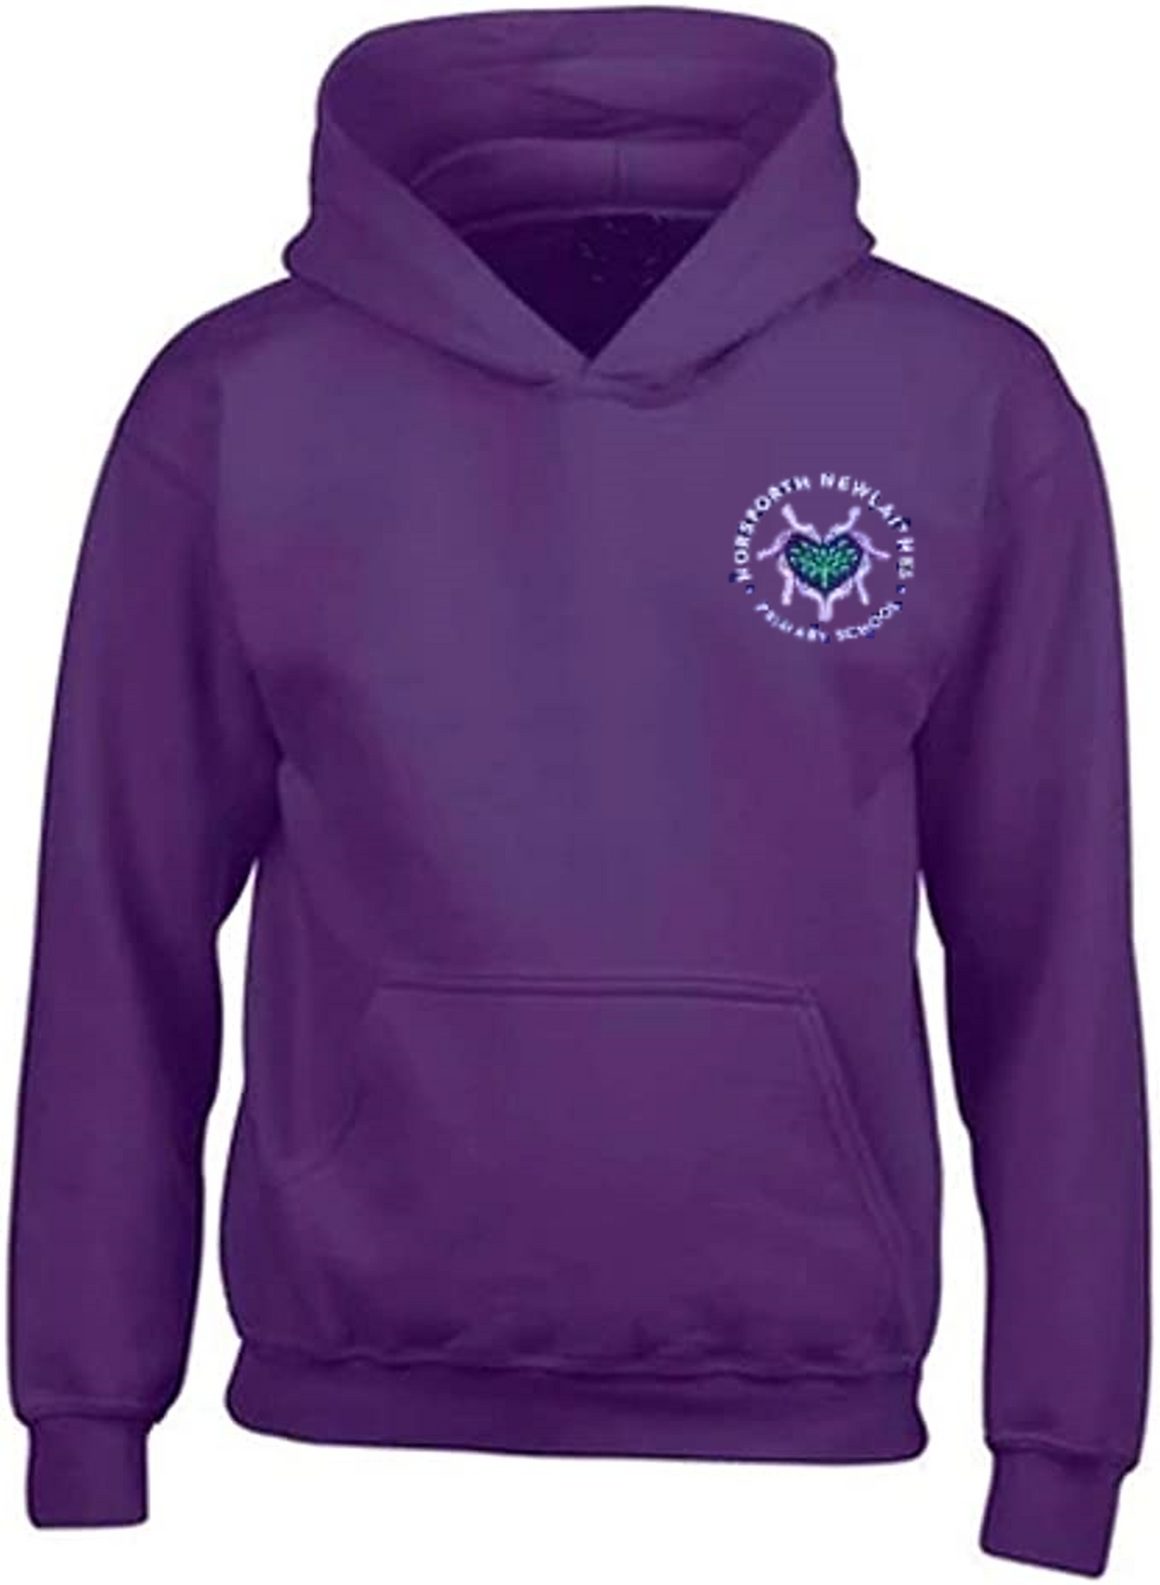 Horsforth Newlaithes Hooded Top